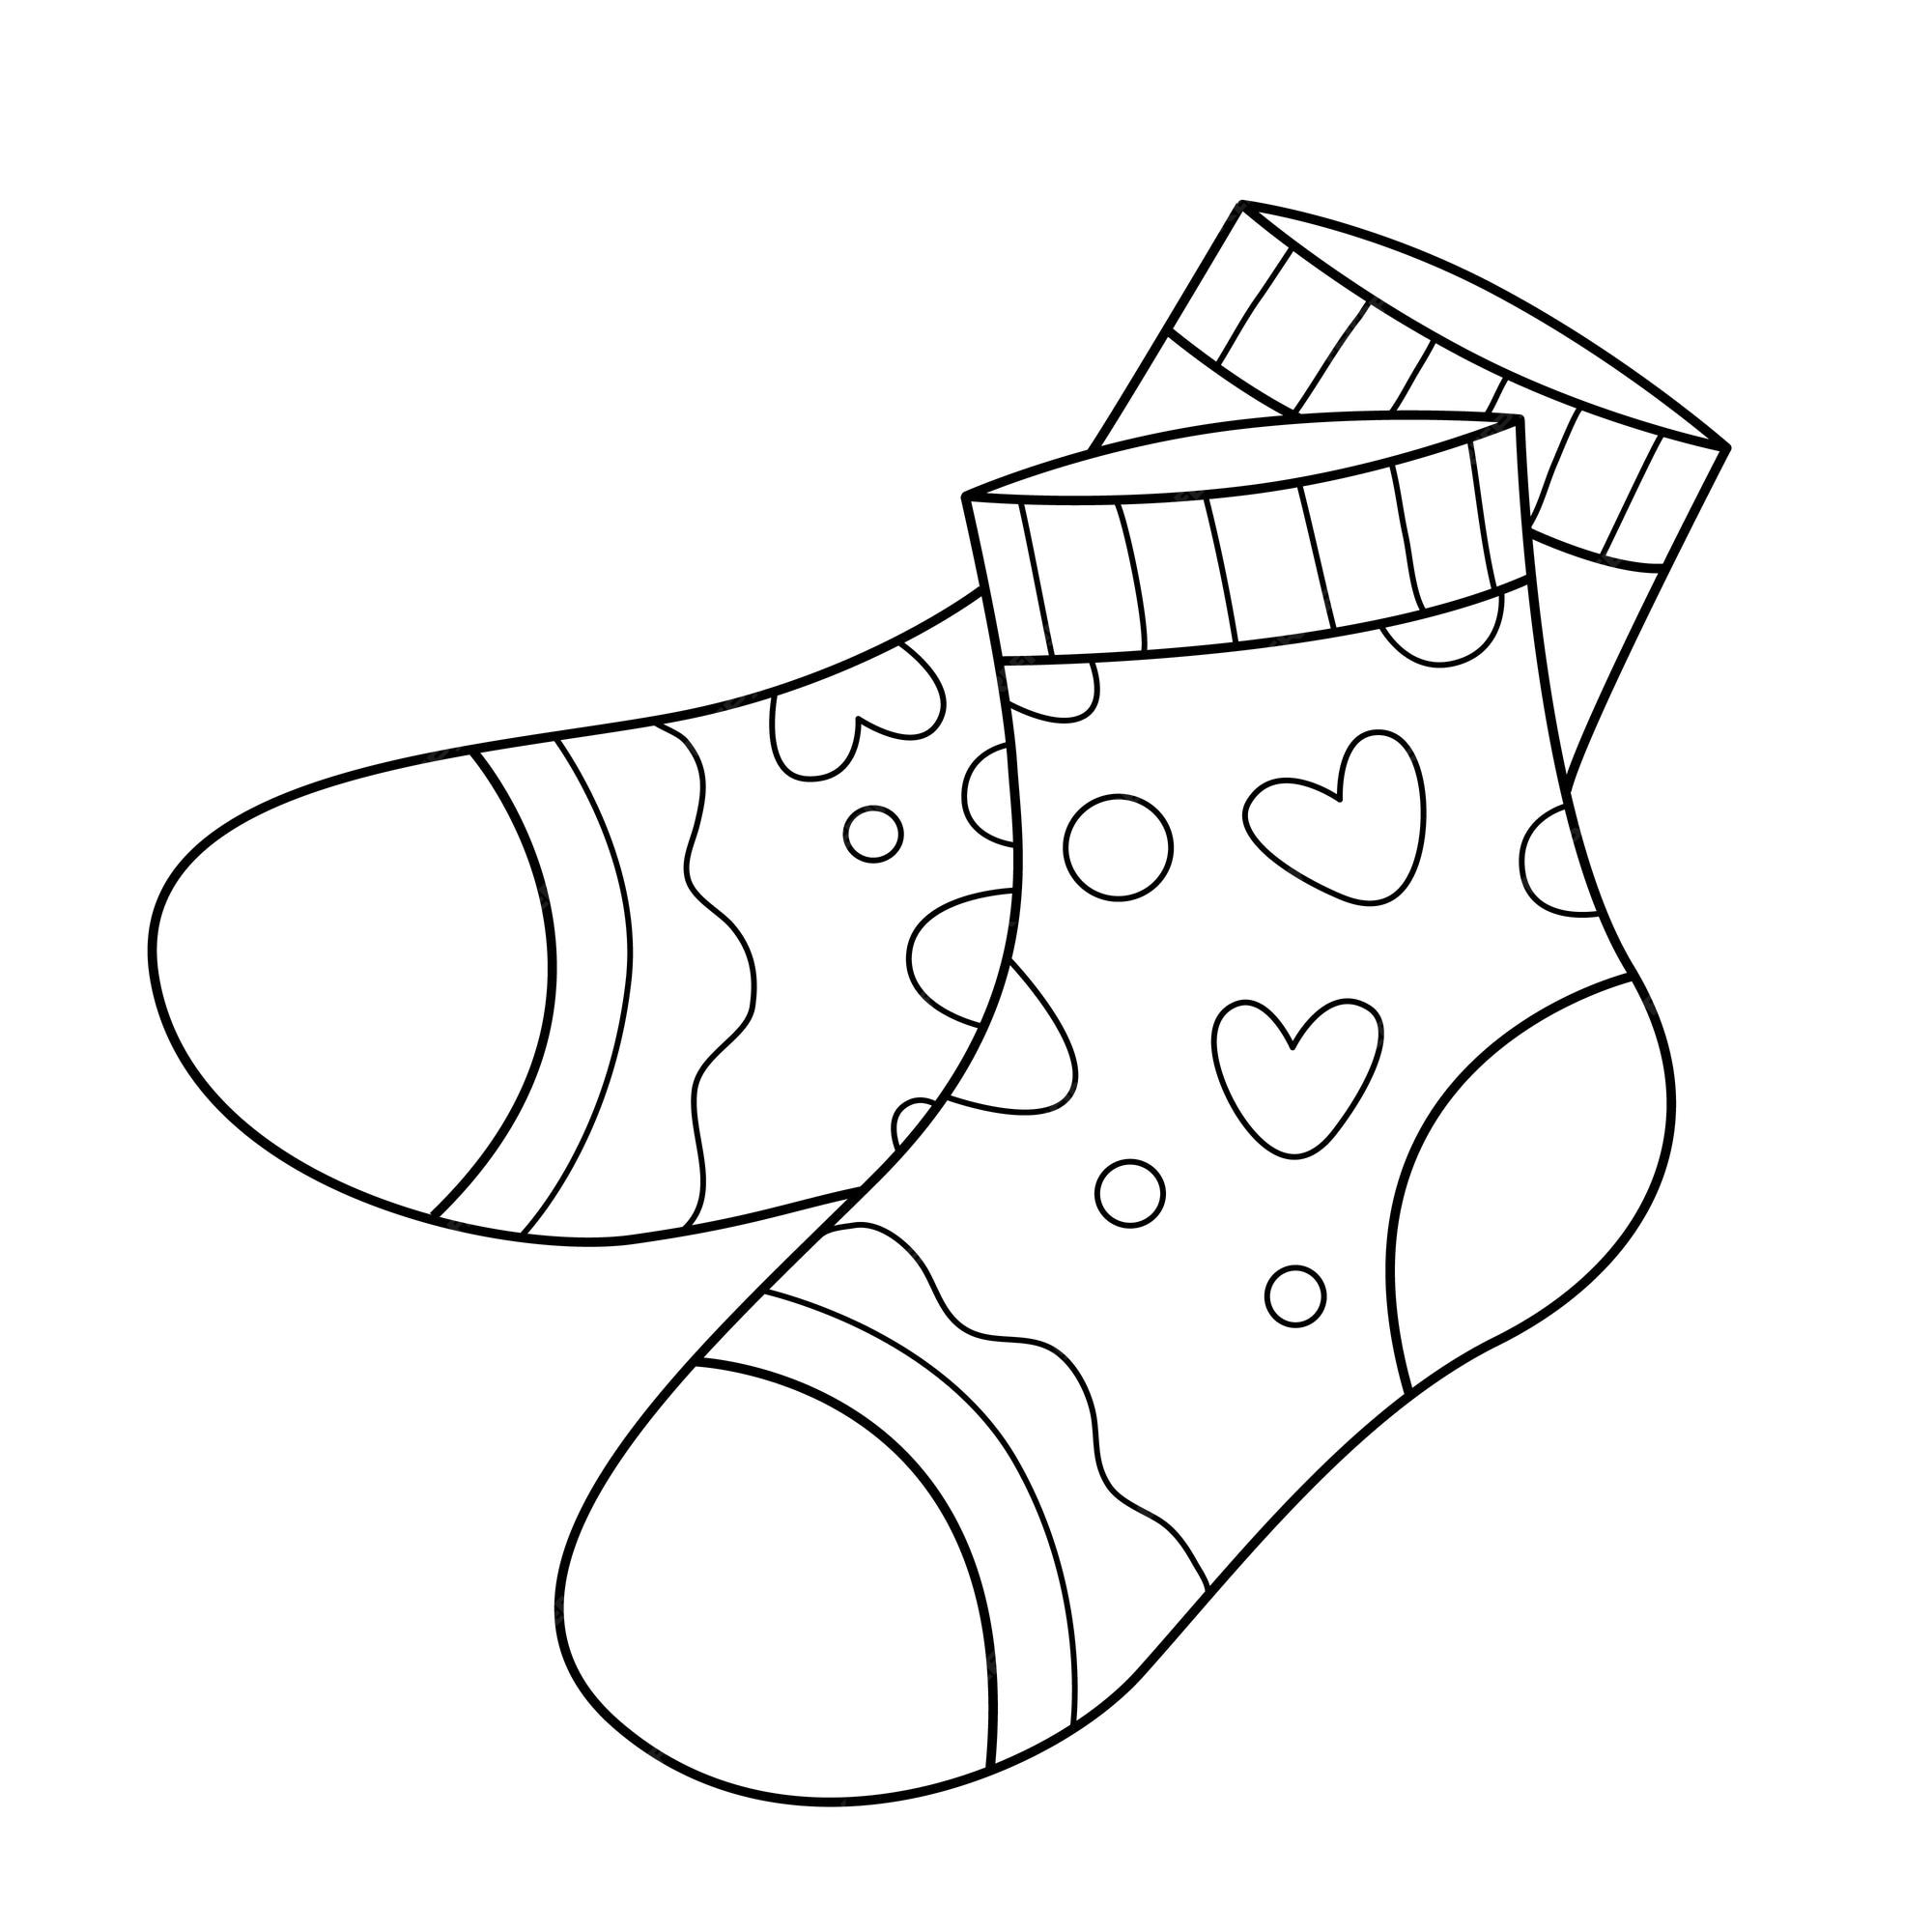 Premium vector socks coloring book for kids coloring page monochrome black and white illustration